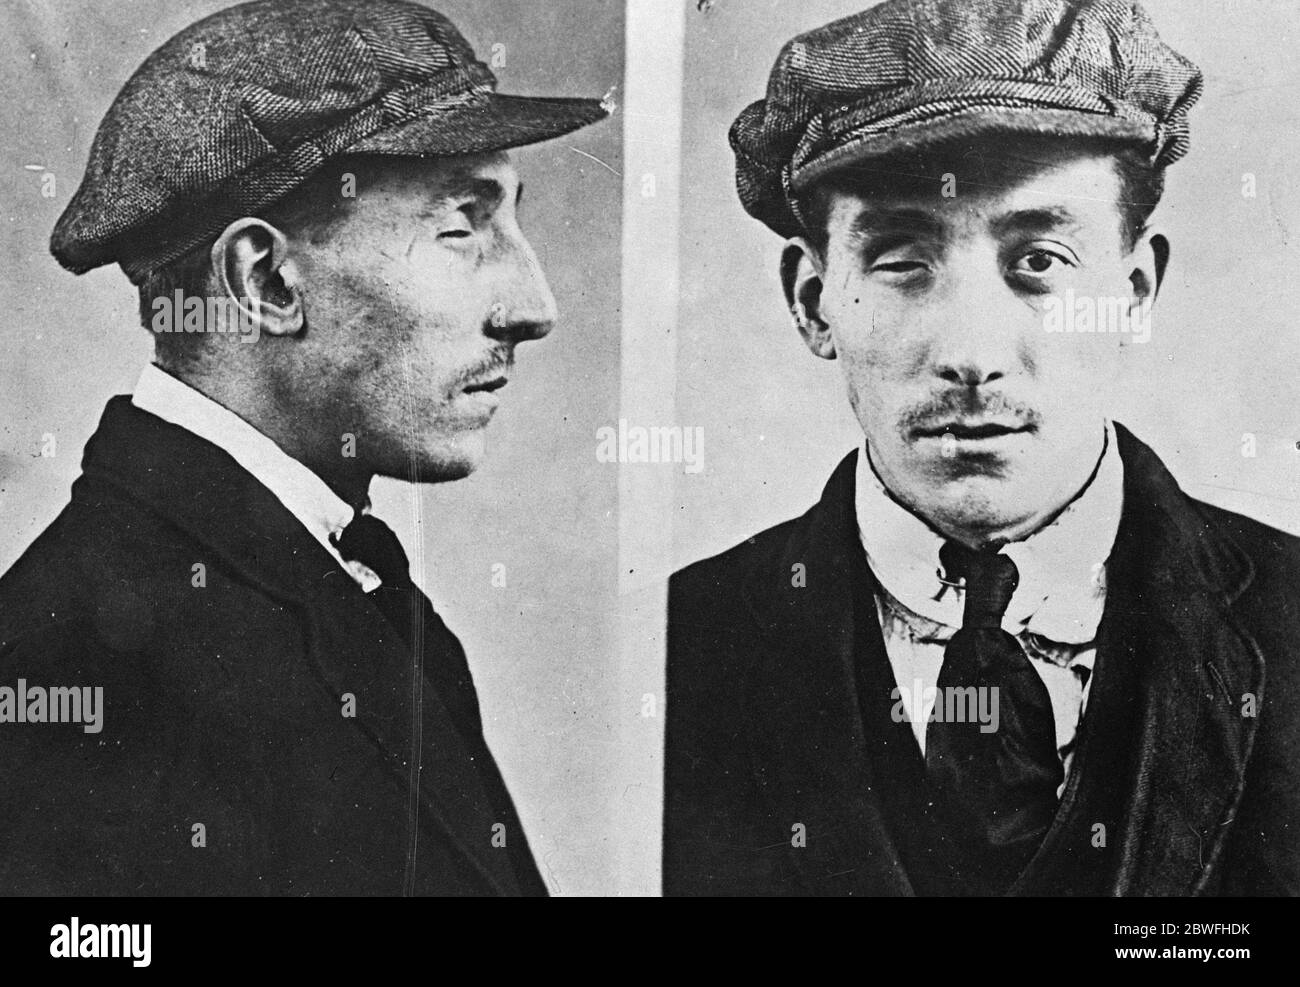 Wanted by police . John Henry Devaney , alias Lawrence , alias Dean , wanted by police in connection with £600 stolen from Clerkenwell Green Post Office . 10 December 1923 Stock Photo